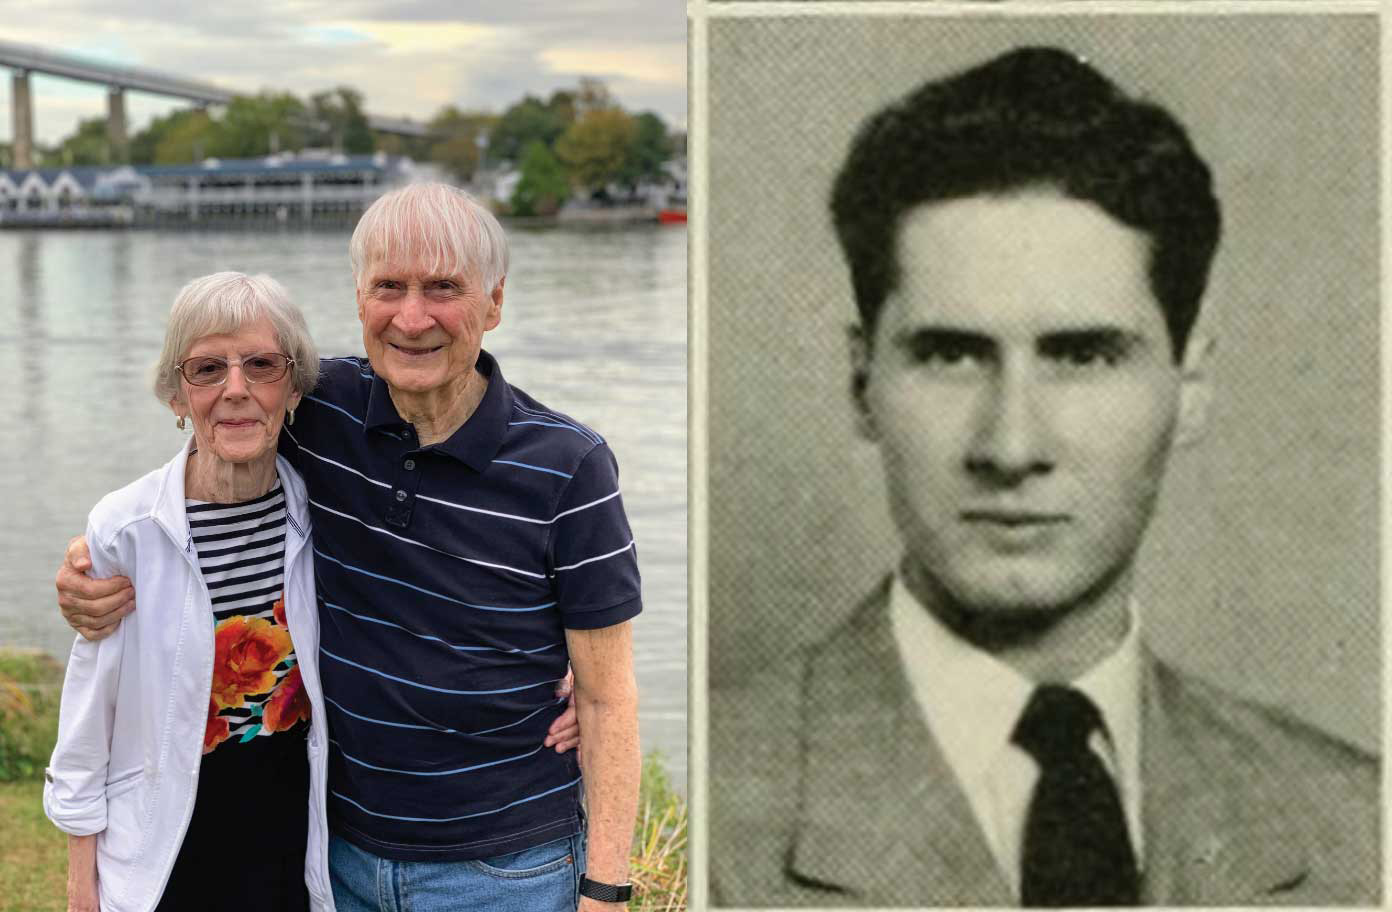 Roy and Mary Alice Smith alongside a photo of Roy Smith in 1952 when he was a junior at UNC-Chapel Hill. Smith later pursued a master’s degree and Ph.D. at Carolina.